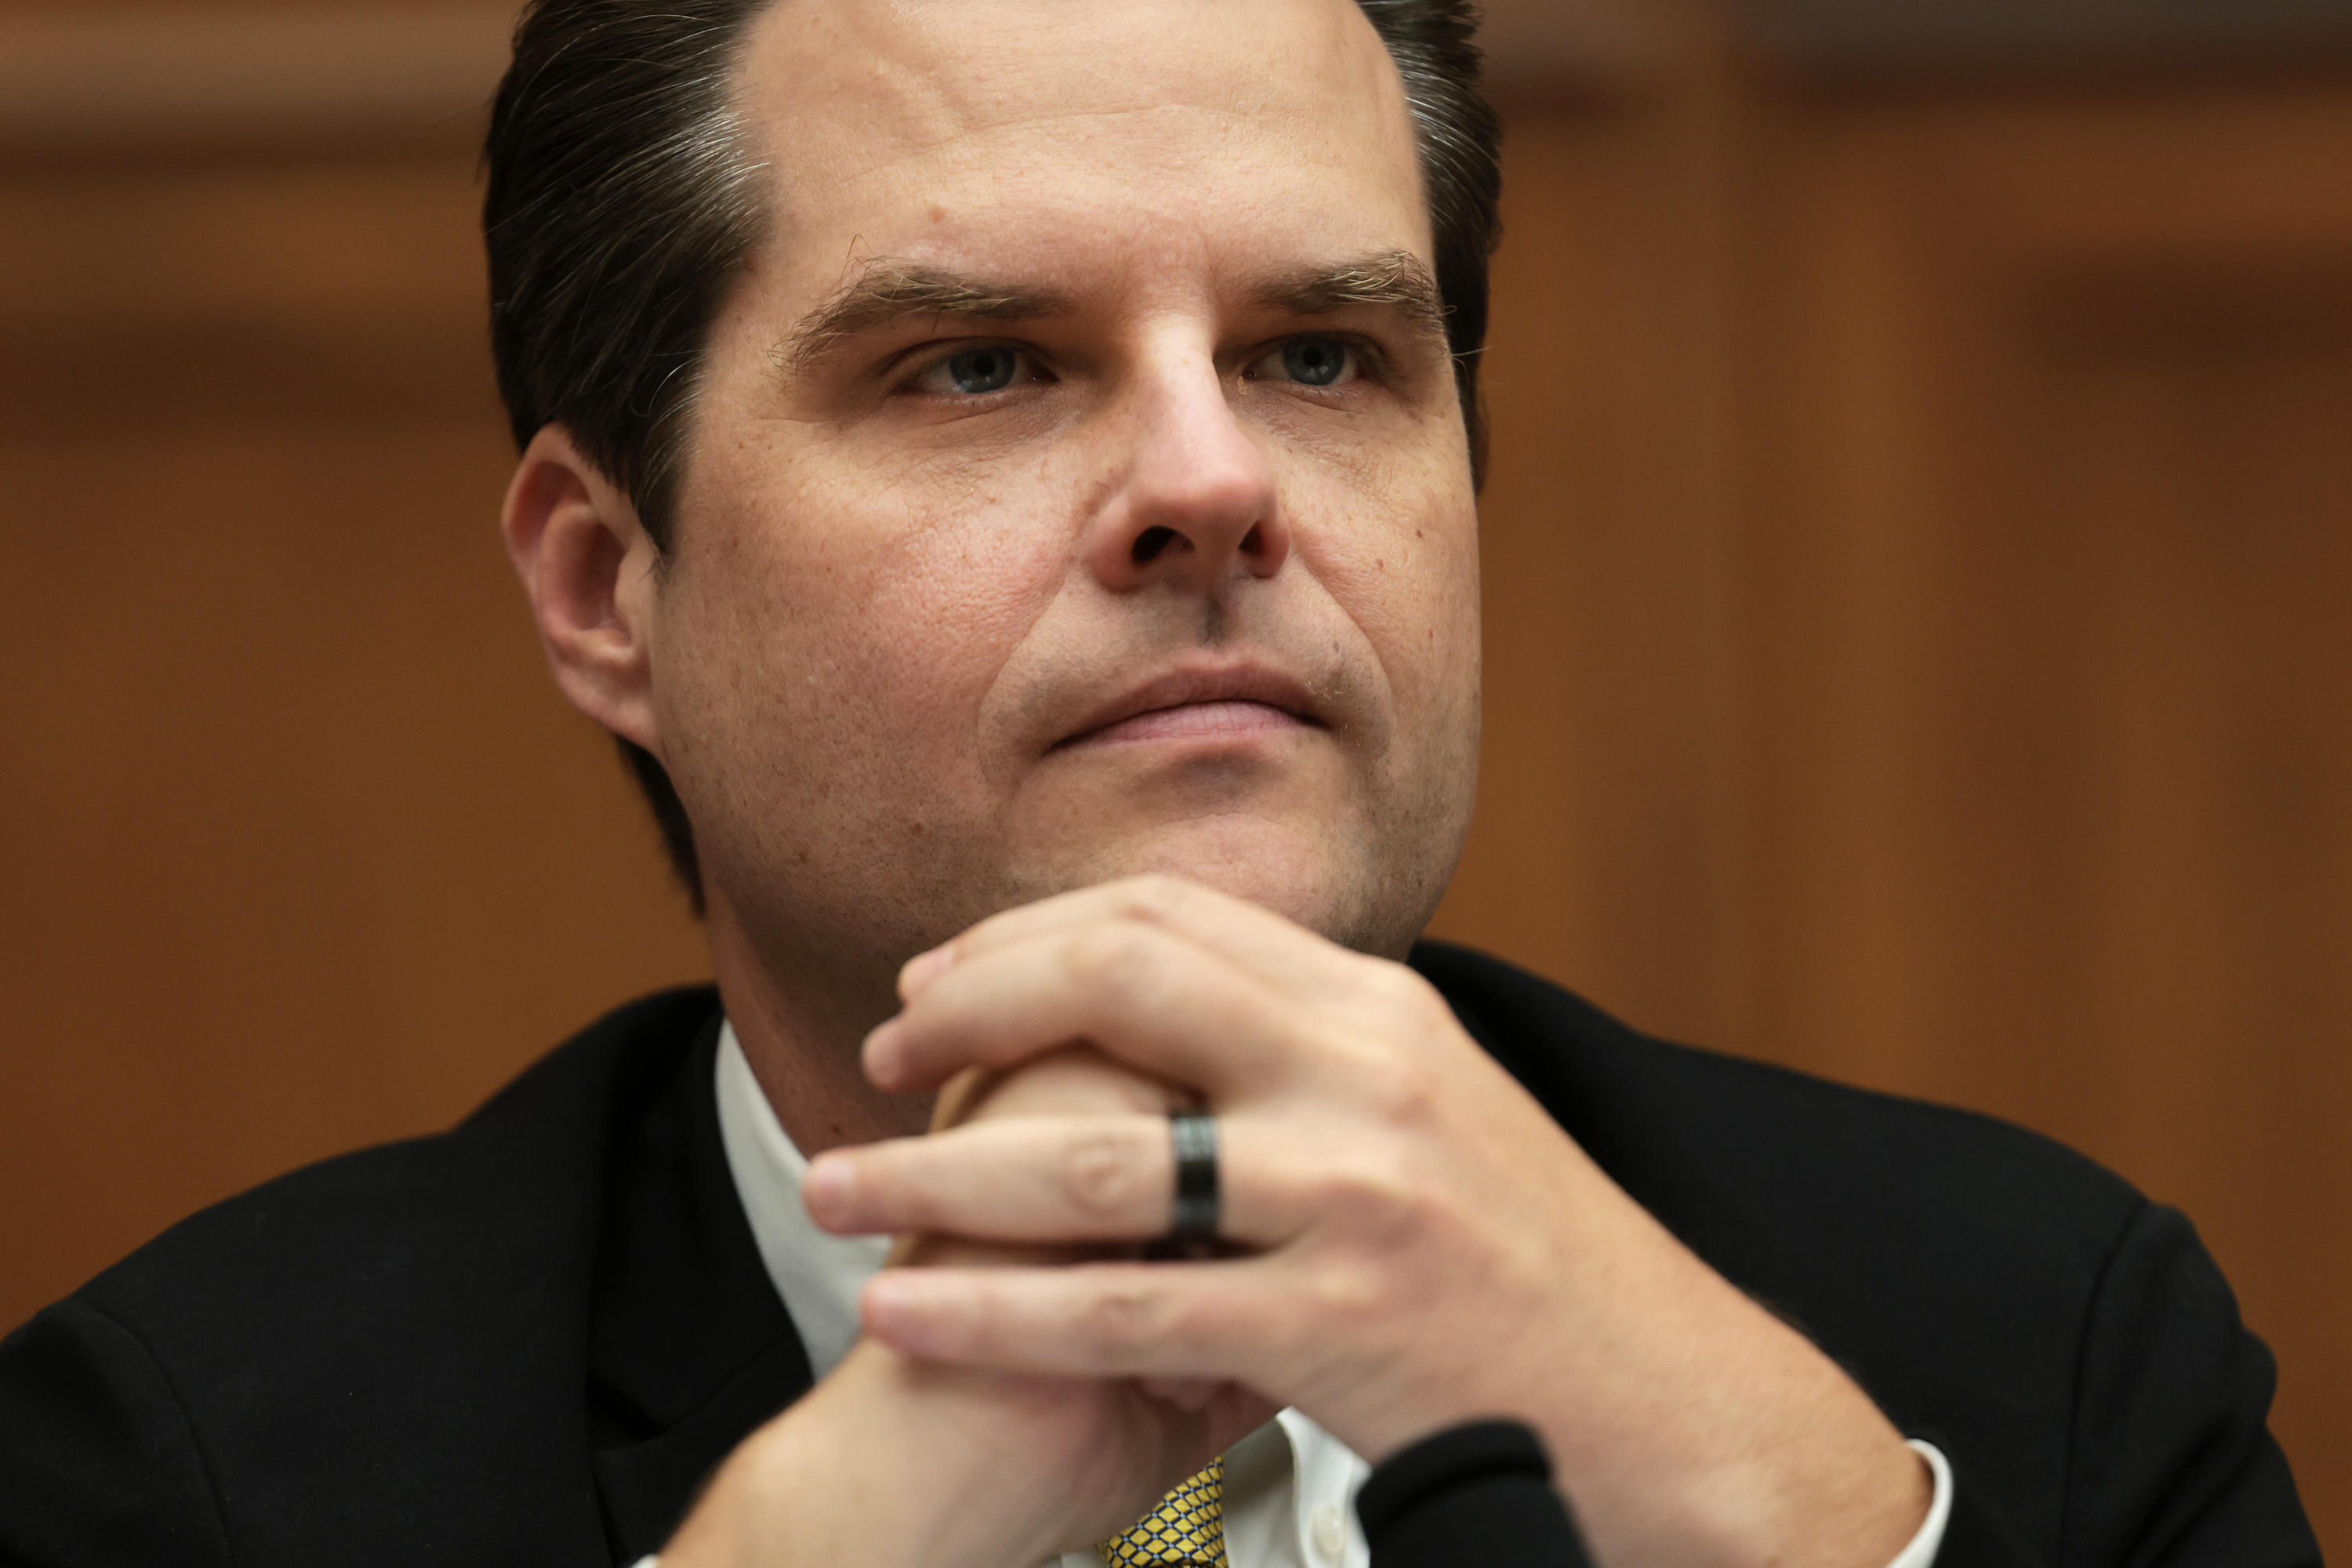 Matt Gaetz questions Attorney General Merrick Garland as he testifies before the House Judiciary Committee in the Rayburn House Office Building in Washington, DC, on September 20.